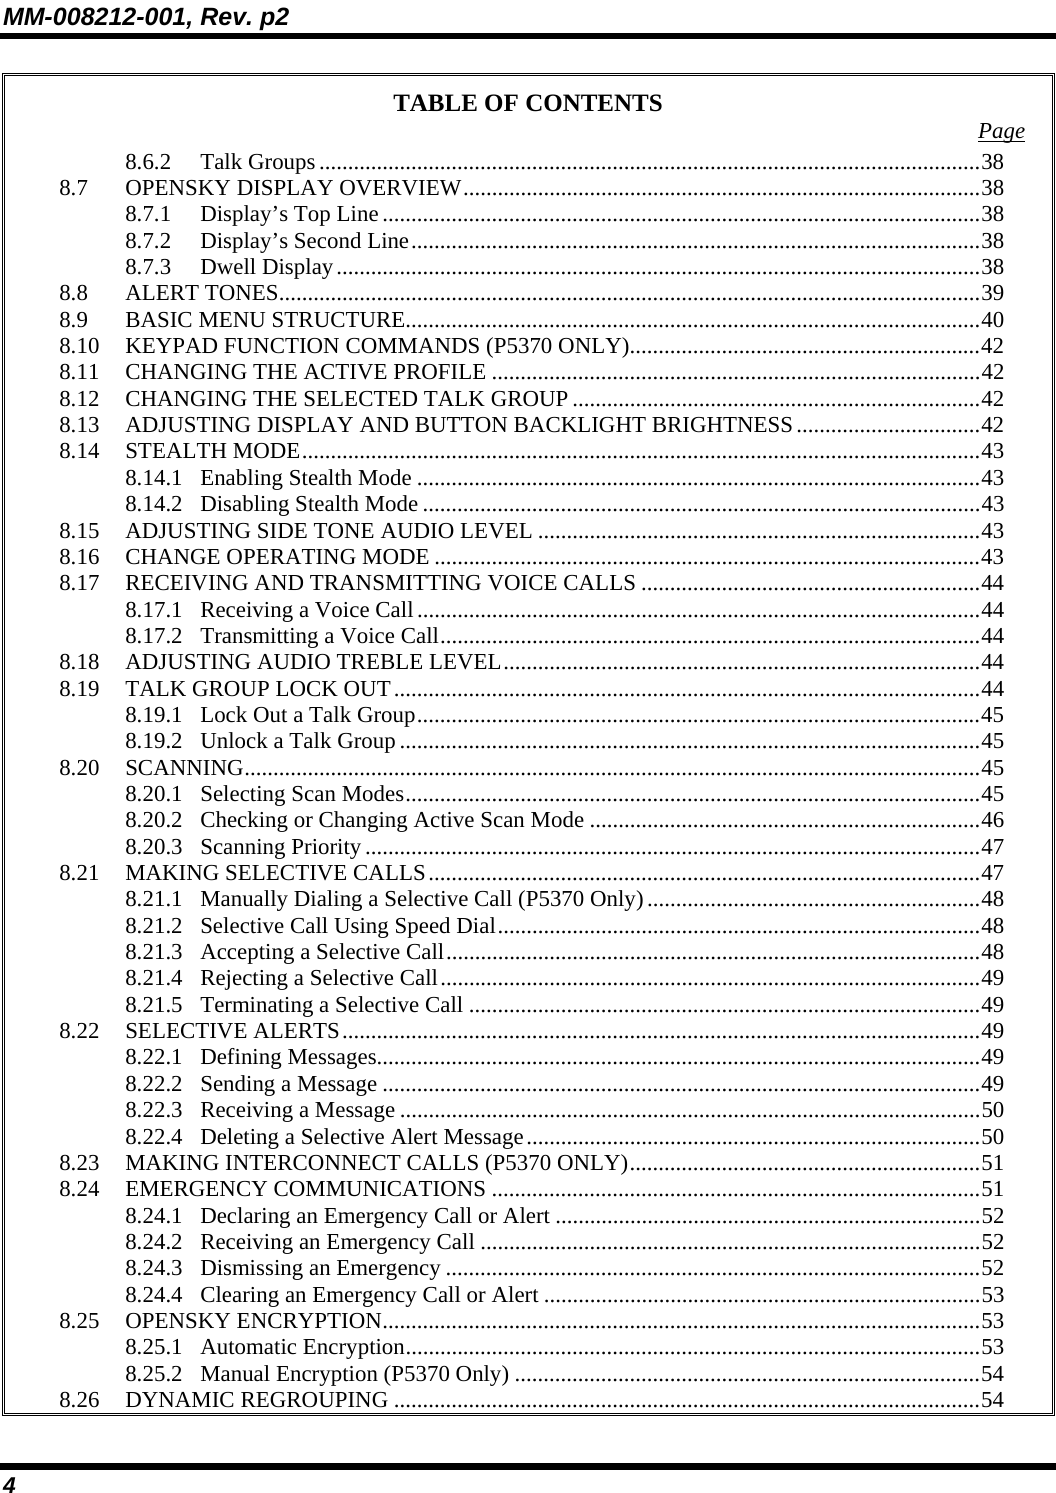 MM-008212-001, Rev. p2 4 TABLE OF CONTENTS  Page 8.6.2 Talk Groups...................................................................................................................38 8.7 OPENSKY DISPLAY OVERVIEW..........................................................................................38 8.7.1 Display’s Top Line........................................................................................................38 8.7.2 Display’s Second Line...................................................................................................38 8.7.3 Dwell Display................................................................................................................38 8.8 ALERT TONES..........................................................................................................................39 8.9 BASIC MENU STRUCTURE....................................................................................................40 8.10 KEYPAD FUNCTION COMMANDS (P5370 ONLY).............................................................42 8.11 CHANGING THE ACTIVE PROFILE .....................................................................................42 8.12 CHANGING THE SELECTED TALK GROUP .......................................................................42 8.13 ADJUSTING DISPLAY AND BUTTON BACKLIGHT BRIGHTNESS................................42 8.14 STEALTH MODE......................................................................................................................43 8.14.1 Enabling Stealth Mode ..................................................................................................43 8.14.2 Disabling Stealth Mode .................................................................................................43 8.15 ADJUSTING SIDE TONE AUDIO LEVEL .............................................................................43 8.16 CHANGE OPERATING MODE ...............................................................................................43 8.17 RECEIVING AND TRANSMITTING VOICE CALLS ...........................................................44 8.17.1 Receiving a Voice Call..................................................................................................44 8.17.2 Transmitting a Voice Call..............................................................................................44 8.18 ADJUSTING AUDIO TREBLE LEVEL...................................................................................44 8.19 TALK GROUP LOCK OUT......................................................................................................44 8.19.1 Lock Out a Talk Group..................................................................................................45 8.19.2 Unlock a Talk Group.....................................................................................................45 8.20 SCANNING................................................................................................................................45 8.20.1 Selecting Scan Modes....................................................................................................45 8.20.2 Checking or Changing Active Scan Mode ....................................................................46 8.20.3 Scanning Priority...........................................................................................................47 8.21 MAKING SELECTIVE CALLS................................................................................................47 8.21.1 Manually Dialing a Selective Call (P5370 Only)..........................................................48 8.21.2 Selective Call Using Speed Dial....................................................................................48 8.21.3 Accepting a Selective Call.............................................................................................48 8.21.4 Rejecting a Selective Call..............................................................................................49 8.21.5 Terminating a Selective Call .........................................................................................49 8.22 SELECTIVE ALERTS...............................................................................................................49 8.22.1 Defining Messages.........................................................................................................49 8.22.2 Sending a Message ........................................................................................................49 8.22.3 Receiving a Message .....................................................................................................50 8.22.4 Deleting a Selective Alert Message...............................................................................50 8.23 MAKING INTERCONNECT CALLS (P5370 ONLY).............................................................51 8.24 EMERGENCY COMMUNICATIONS .....................................................................................51 8.24.1 Declaring an Emergency Call or Alert ..........................................................................52 8.24.2 Receiving an Emergency Call .......................................................................................52 8.24.3 Dismissing an Emergency .............................................................................................52 8.24.4 Clearing an Emergency Call or Alert ............................................................................53 8.25 OPENSKY ENCRYPTION........................................................................................................53 8.25.1 Automatic Encryption....................................................................................................53 8.25.2 Manual Encryption (P5370 Only) .................................................................................54 8.26 DYNAMIC REGROUPING ......................................................................................................54 